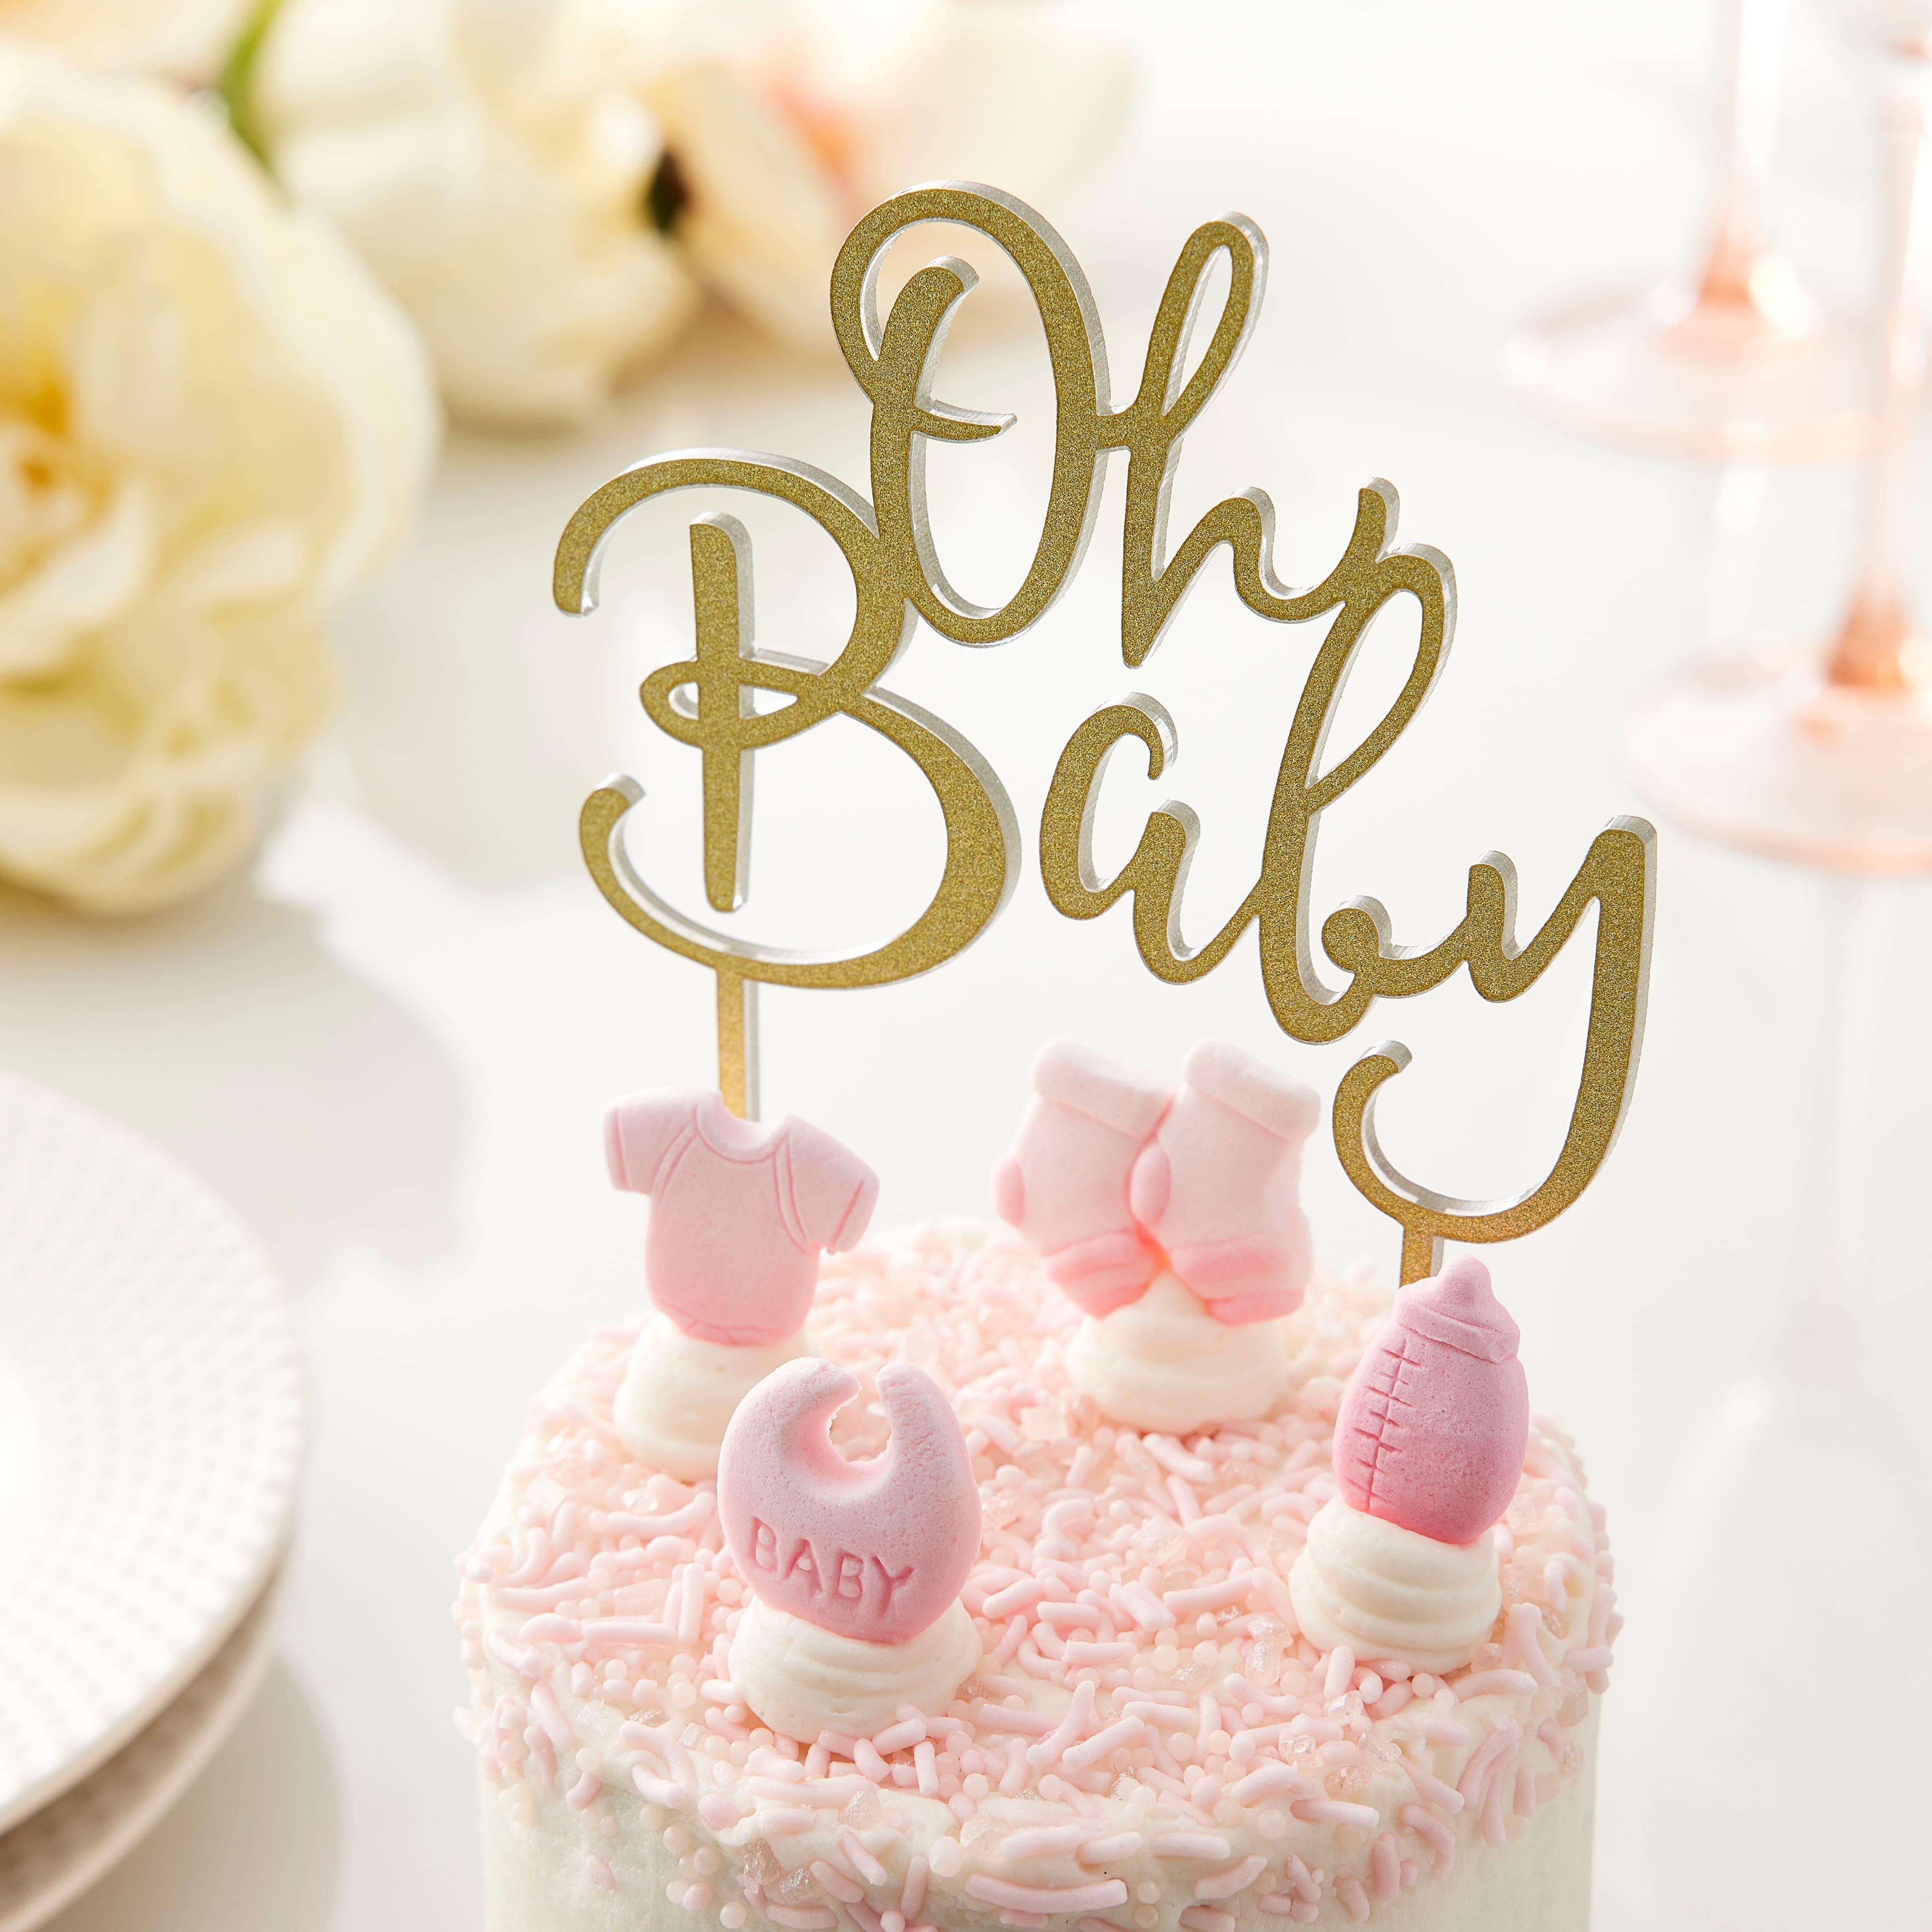 Sweet Baby Girl Cake Topper - Gold & Silver Toppers - XOXOKristen